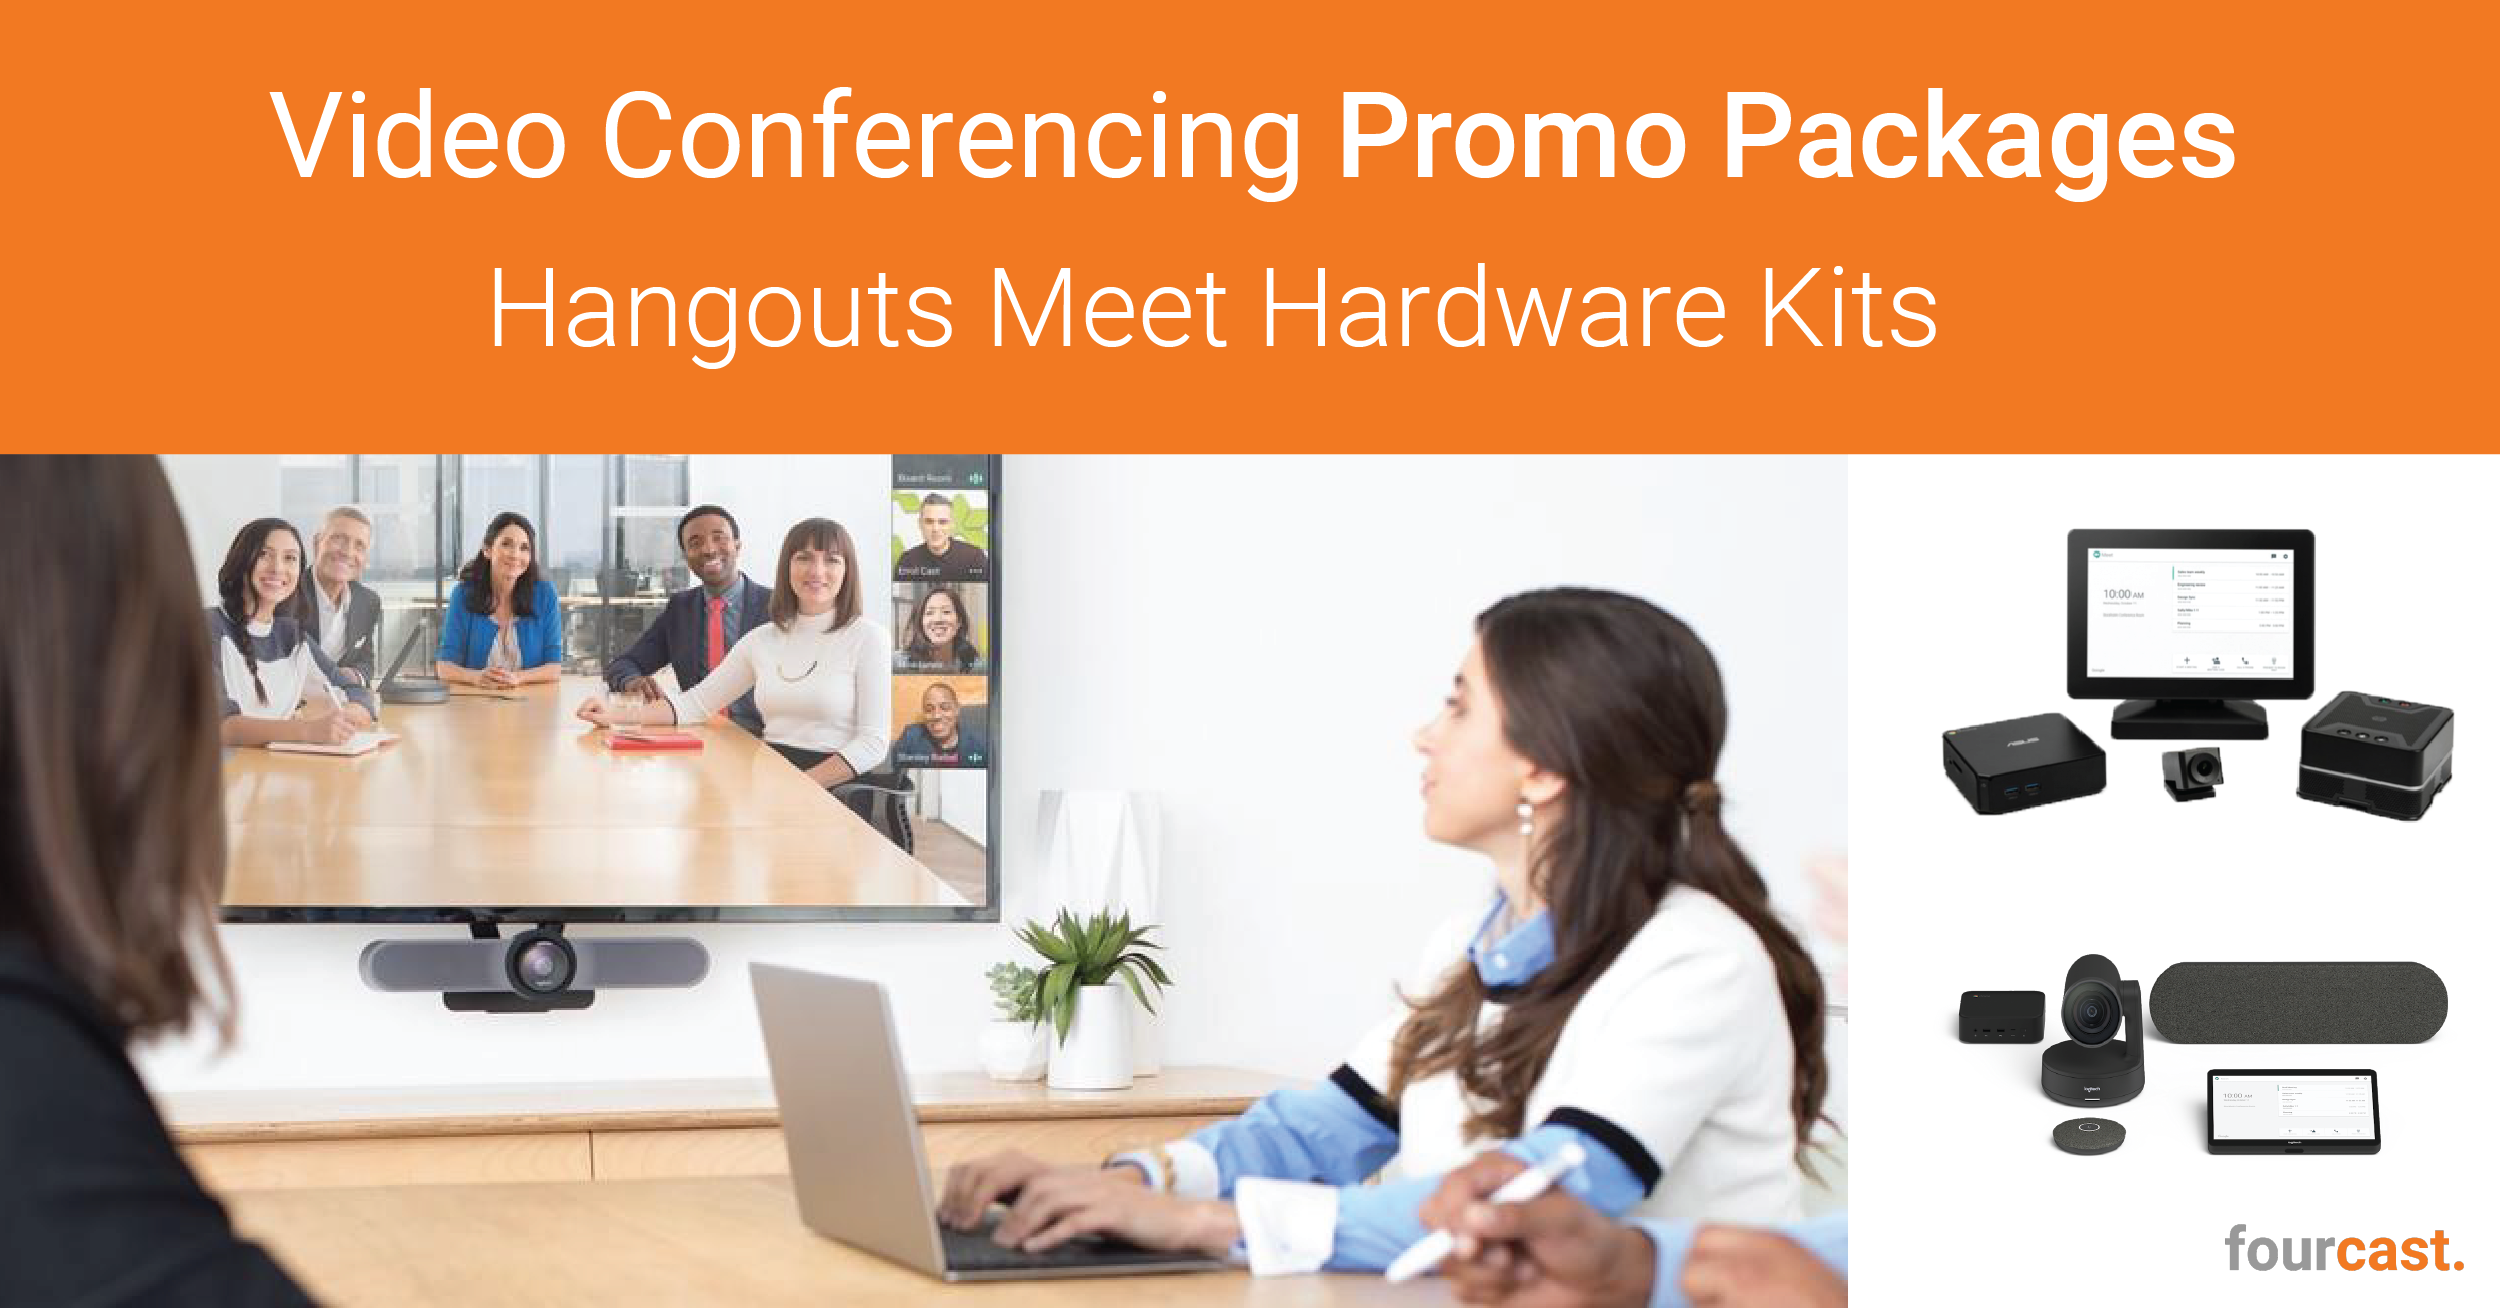 Video Conferencing Promo Packages